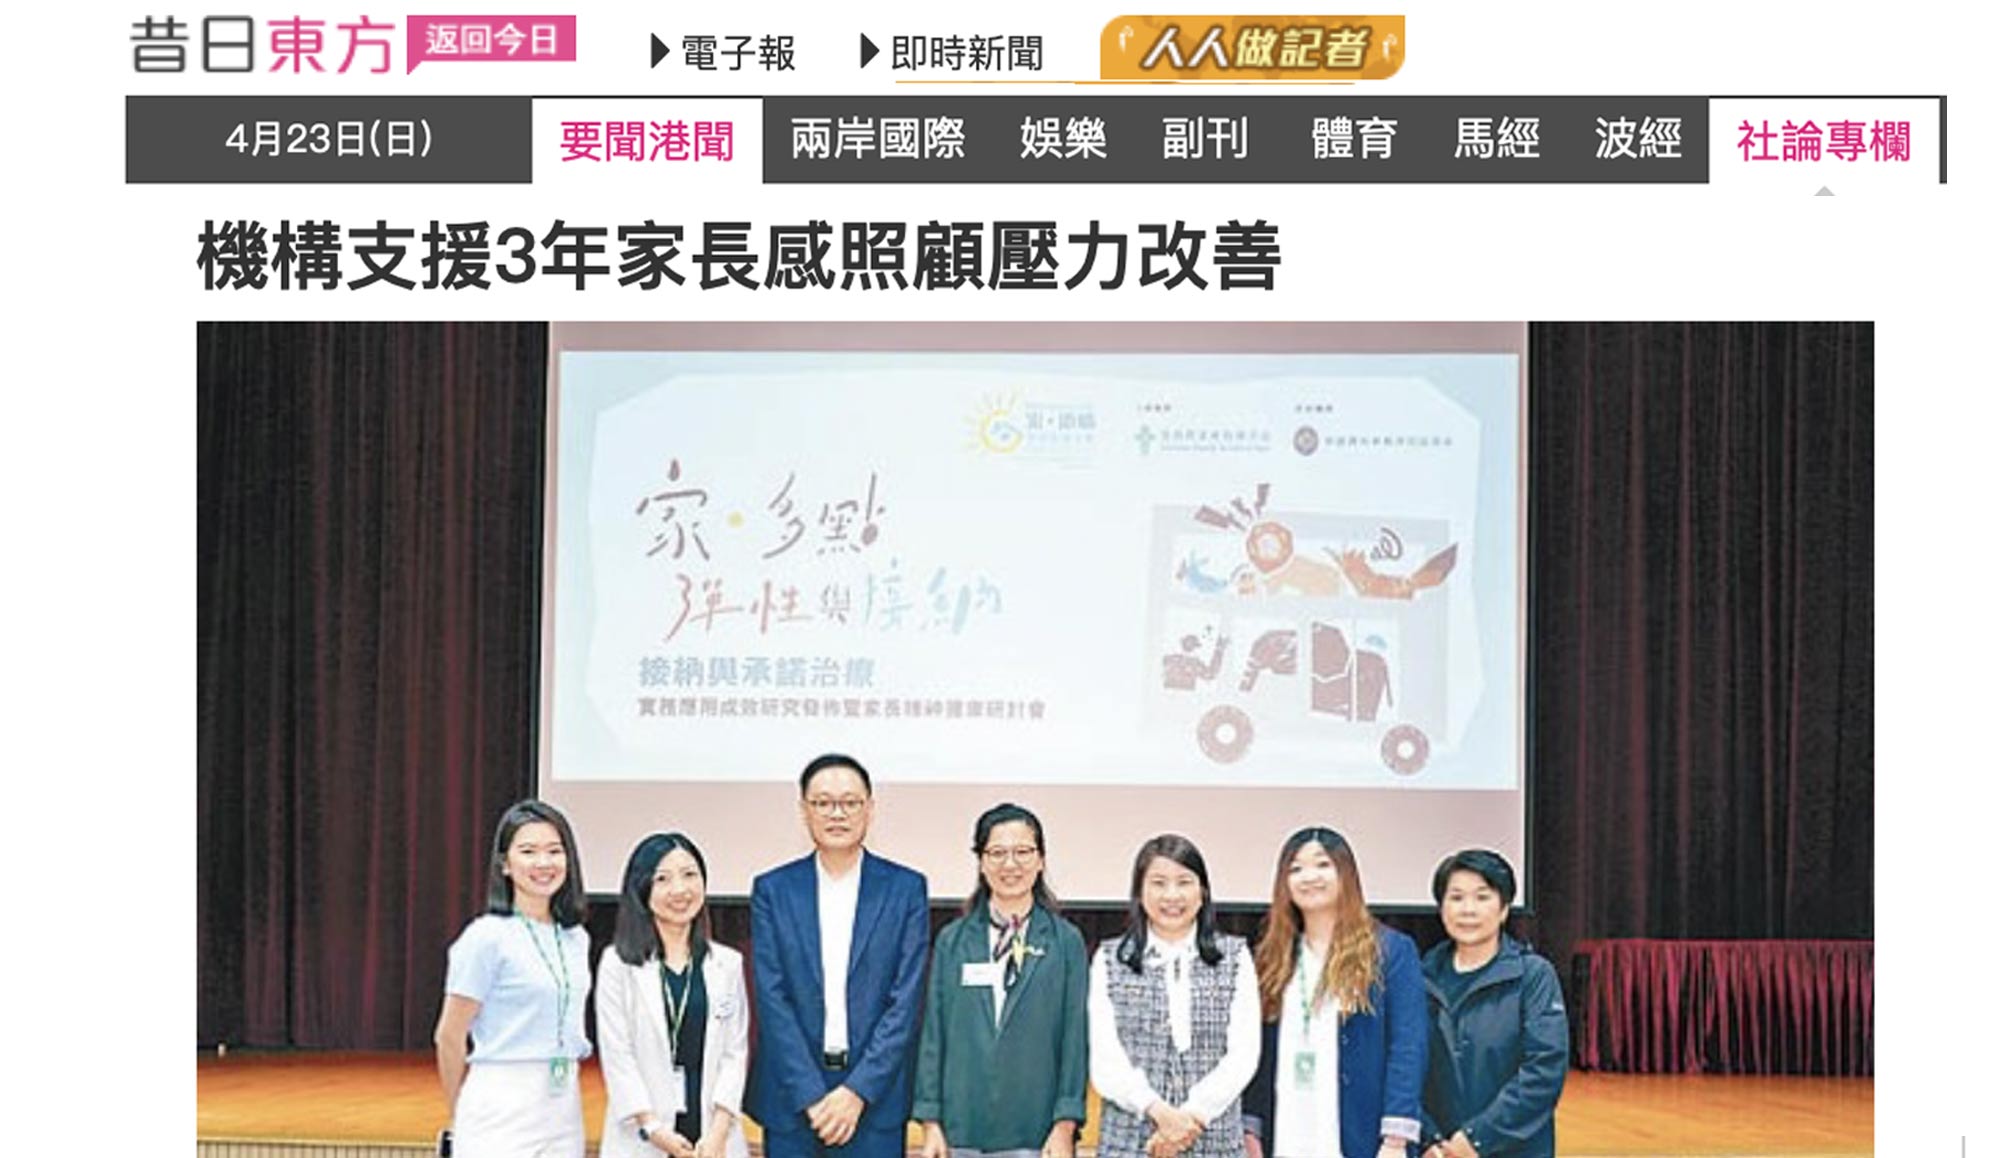 Cover Image - Oriental Daily - The Hong Kong Jockey Club Early Intervention and Community Support Project for Parents 